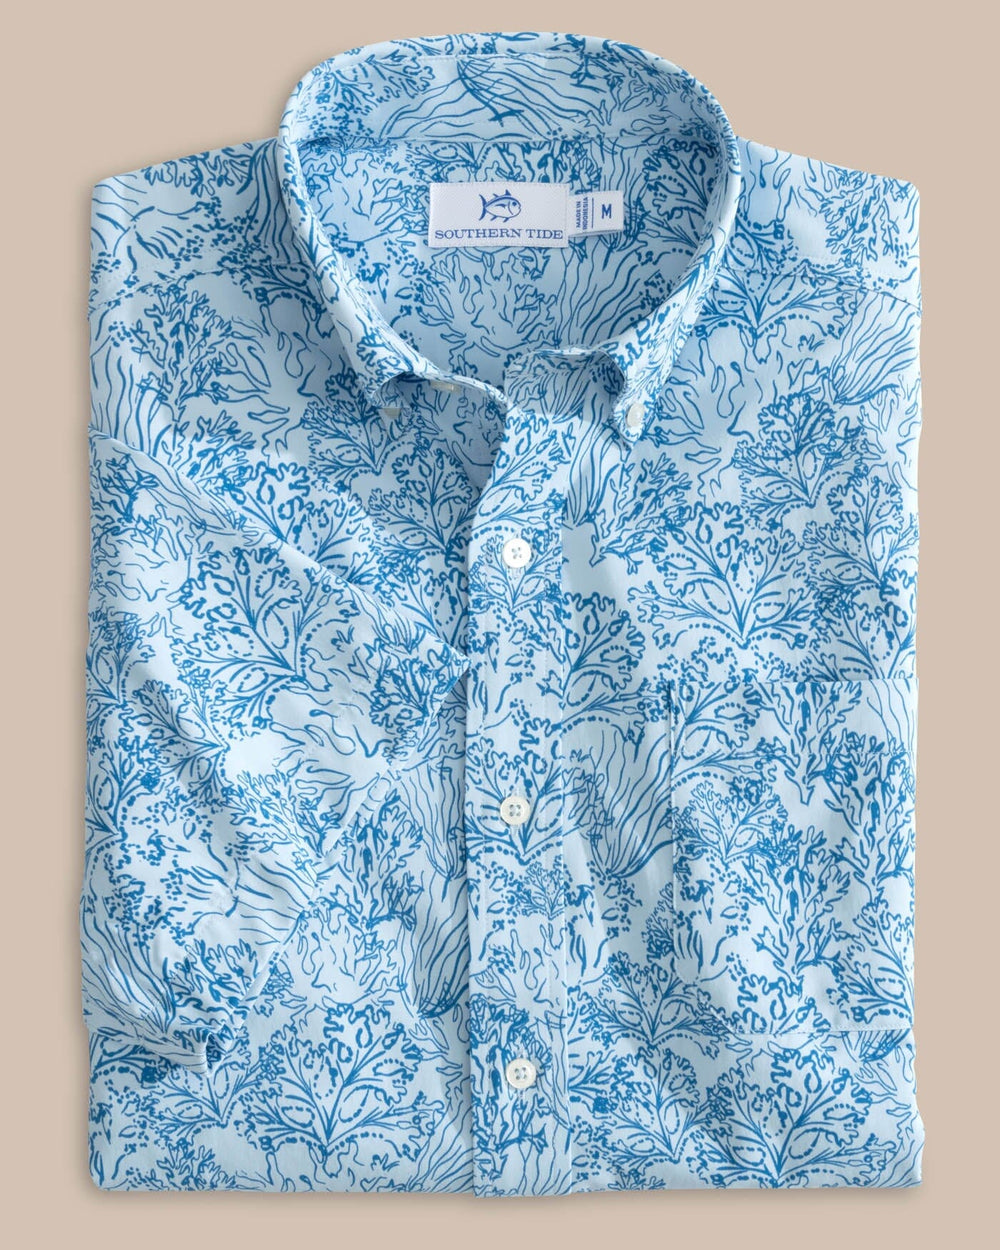 The front view of the Southern Tide Floral Coral Intercoastal Short Sleeve Sport Shirt by Southern Tide - Chilled Blue